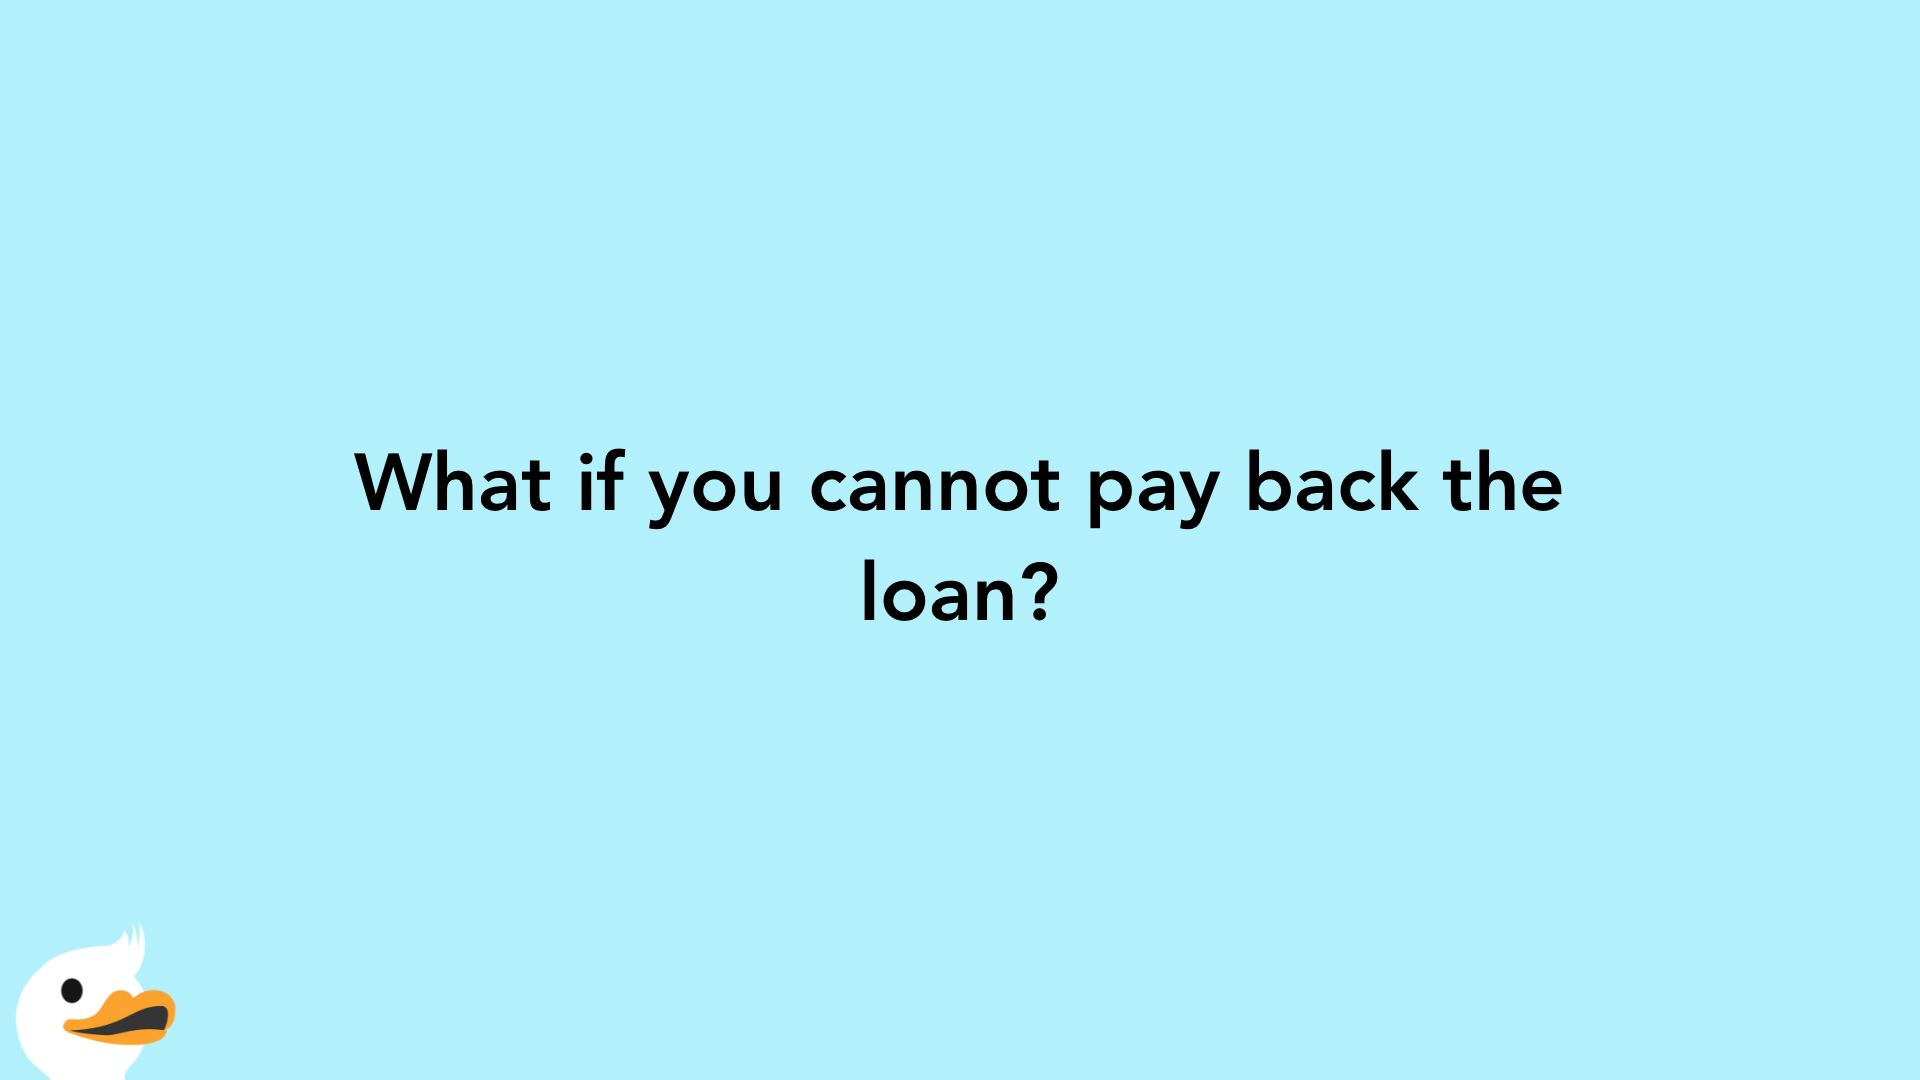 What if you cannot pay back the loan?